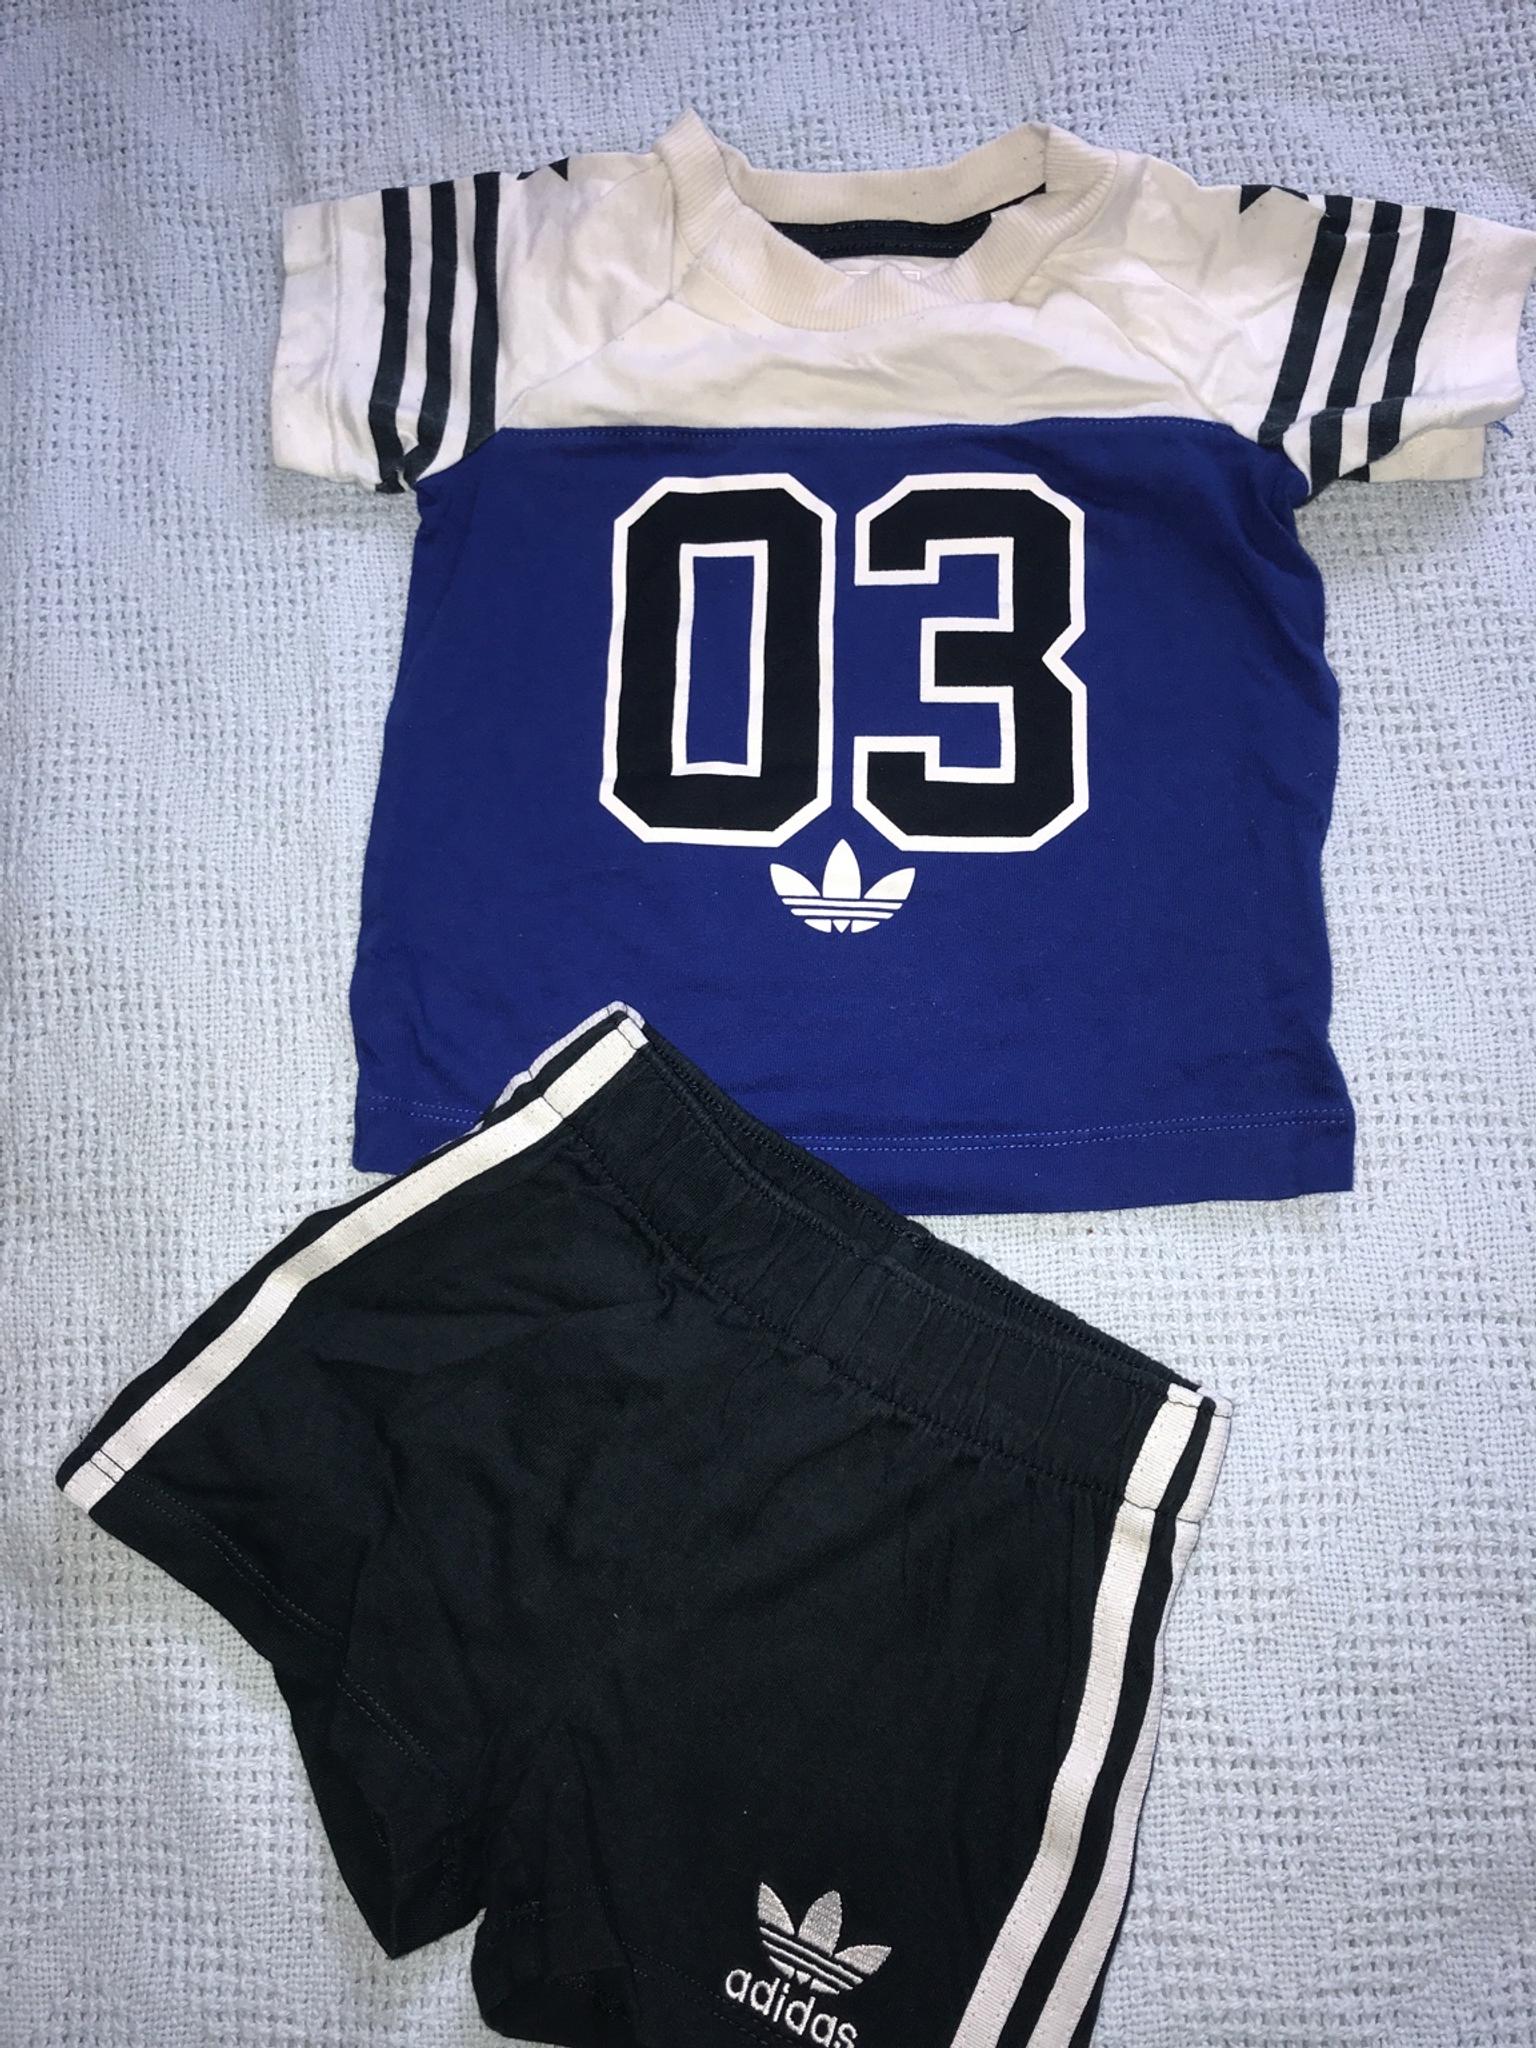 Adidas 0/3 months set 💙 in M20 Manchester for £8.00 for sale | Shpock